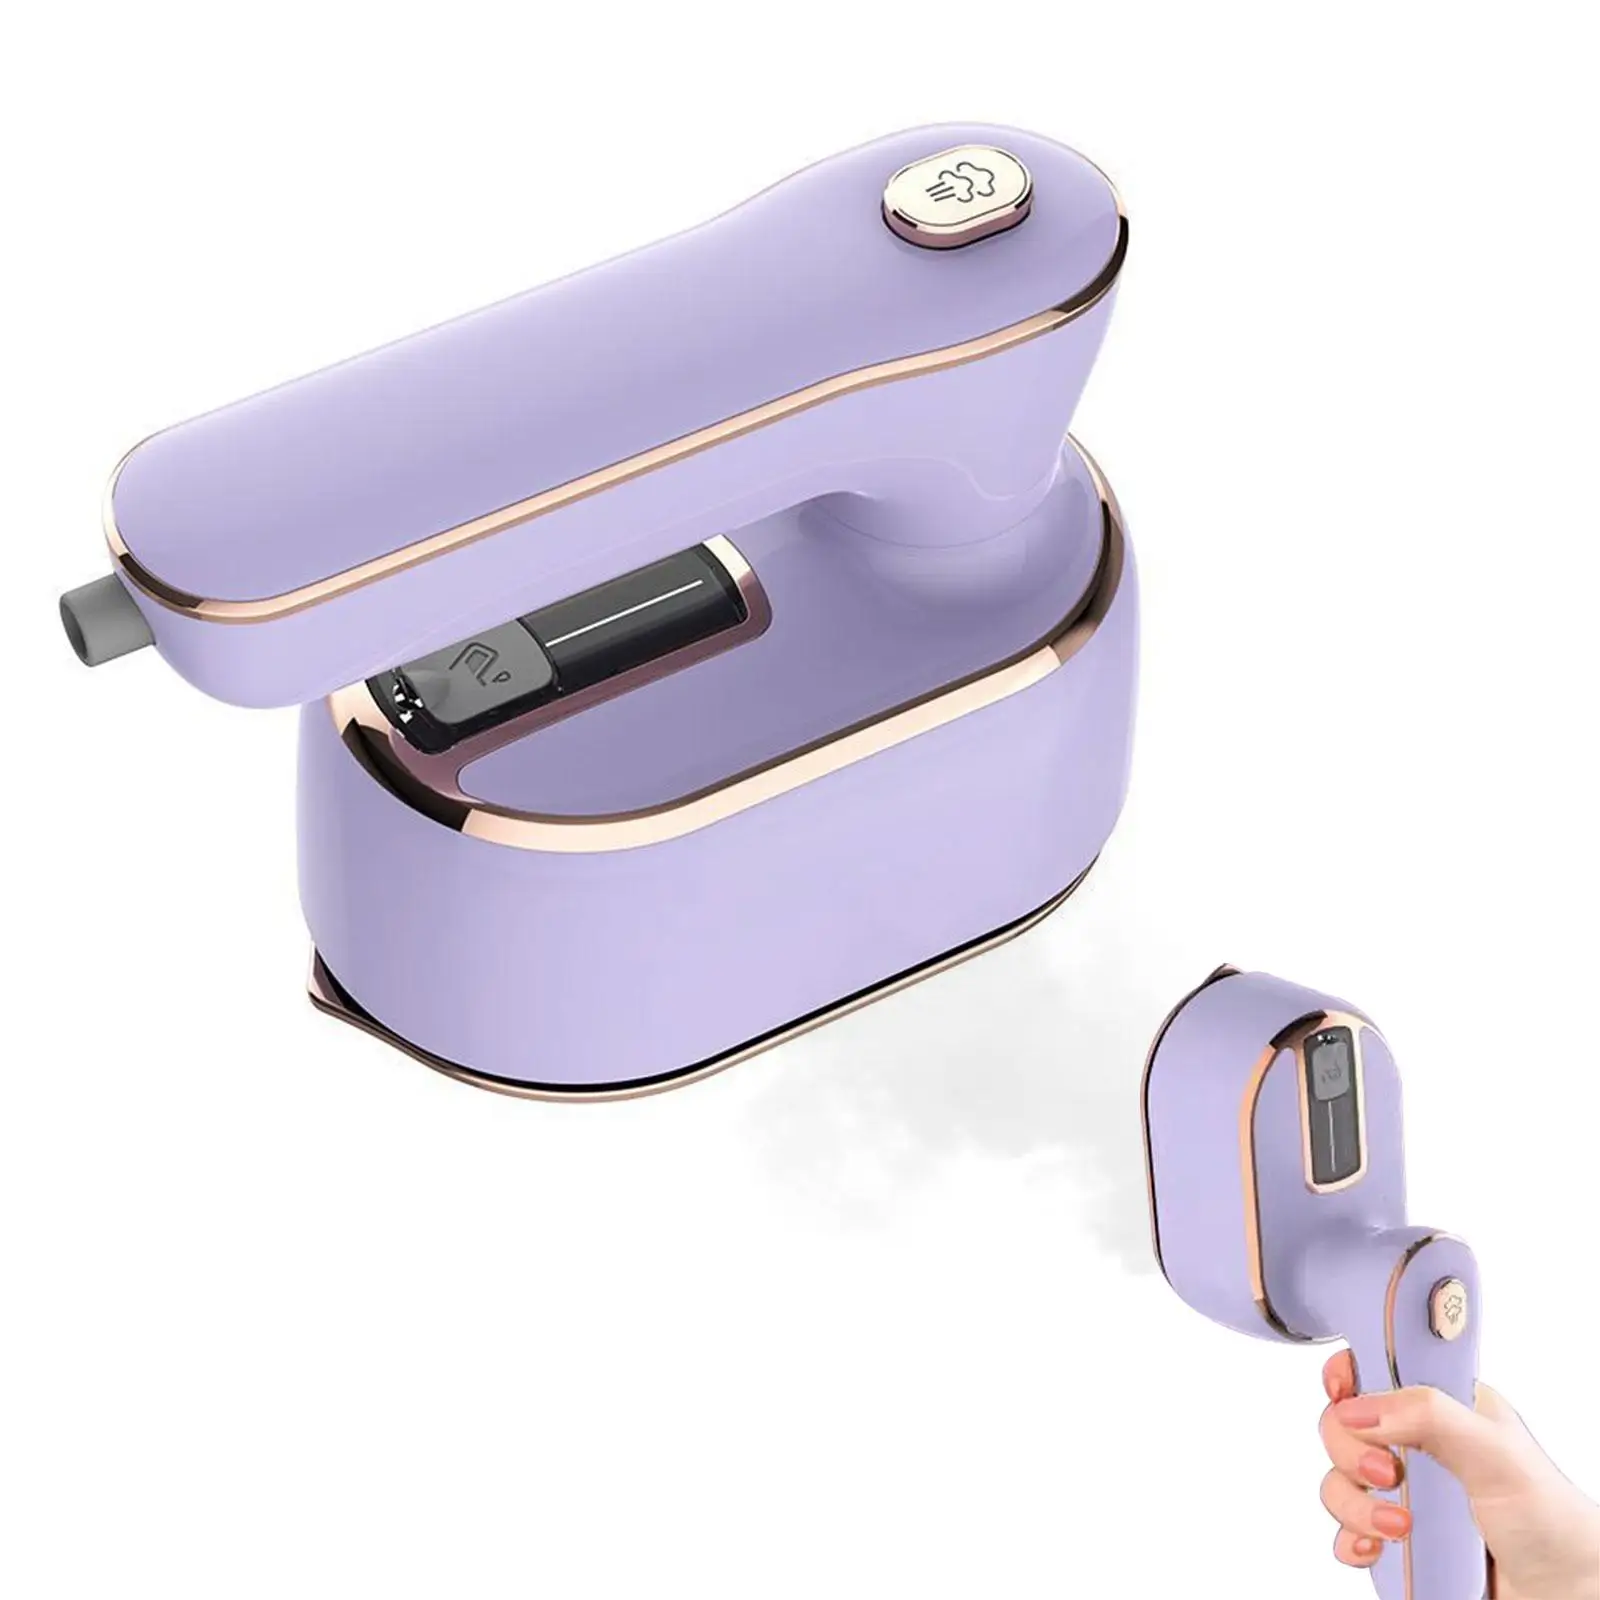 Travel Steamer Iron Portable Mini Steam Iron Folding Clothing Irons Wet and Dry Ironing for College Dorm Hotel Dress